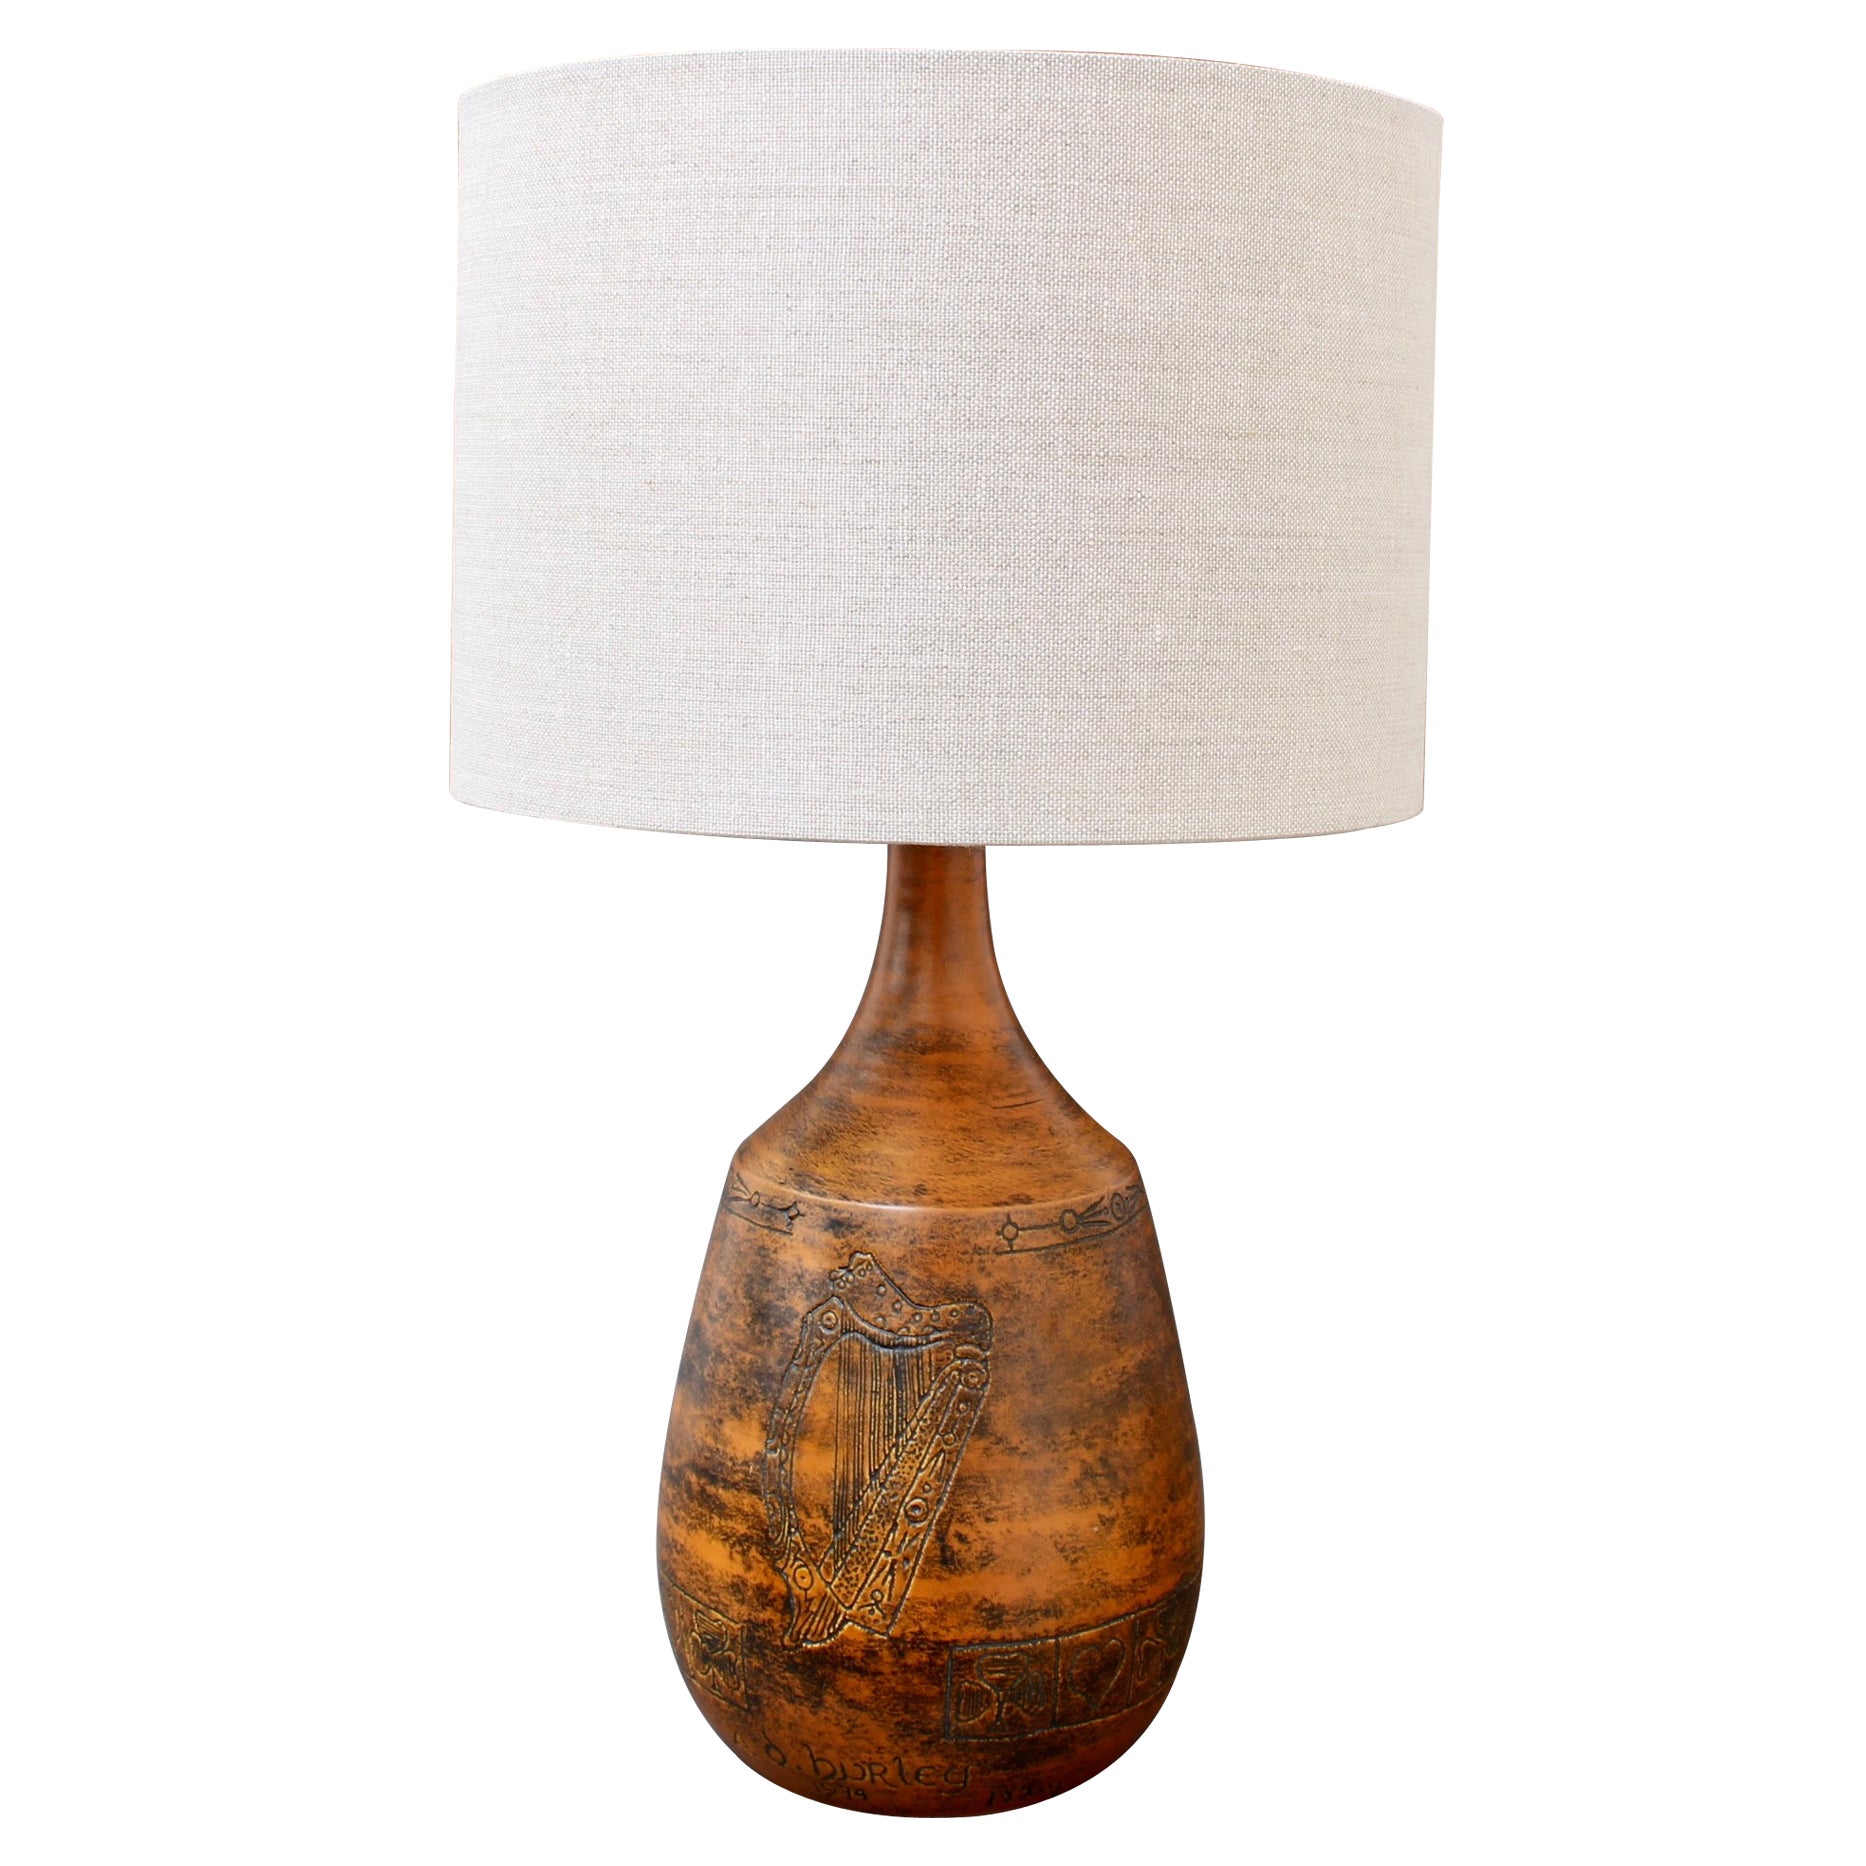 Vintage Ceramic Table Lamp by Jacques Blin '1974'